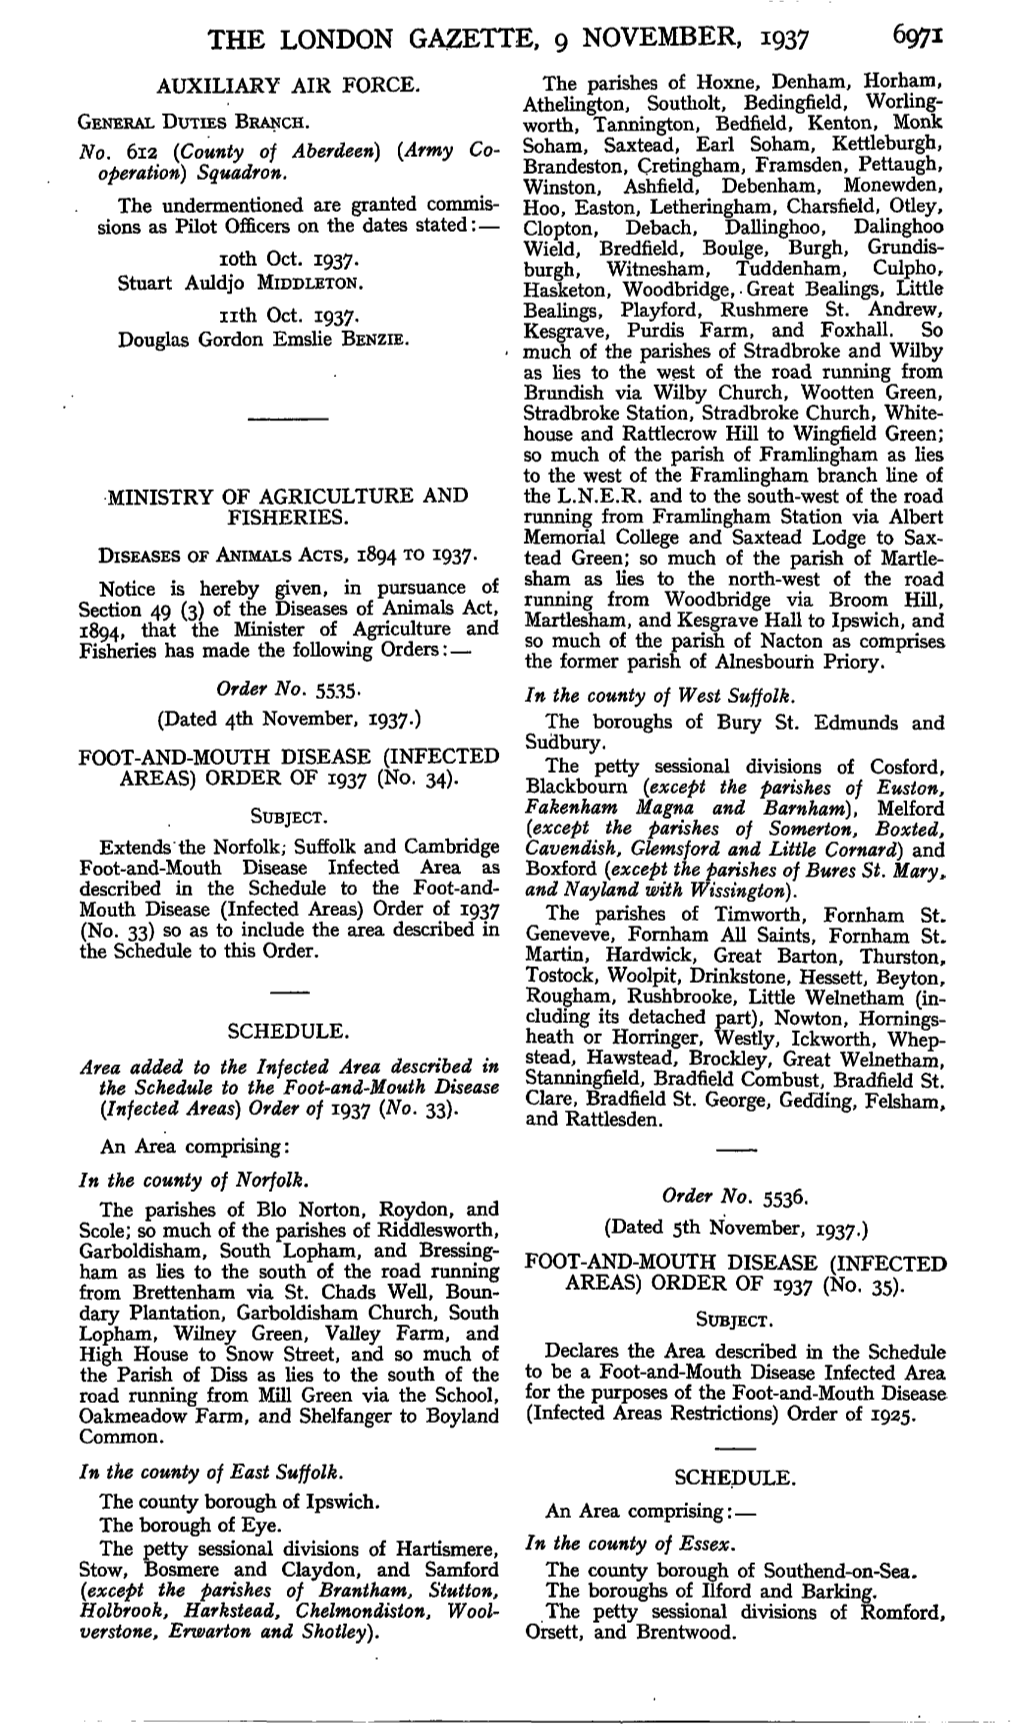 The London Gazette, Issue 34452, Page 6971